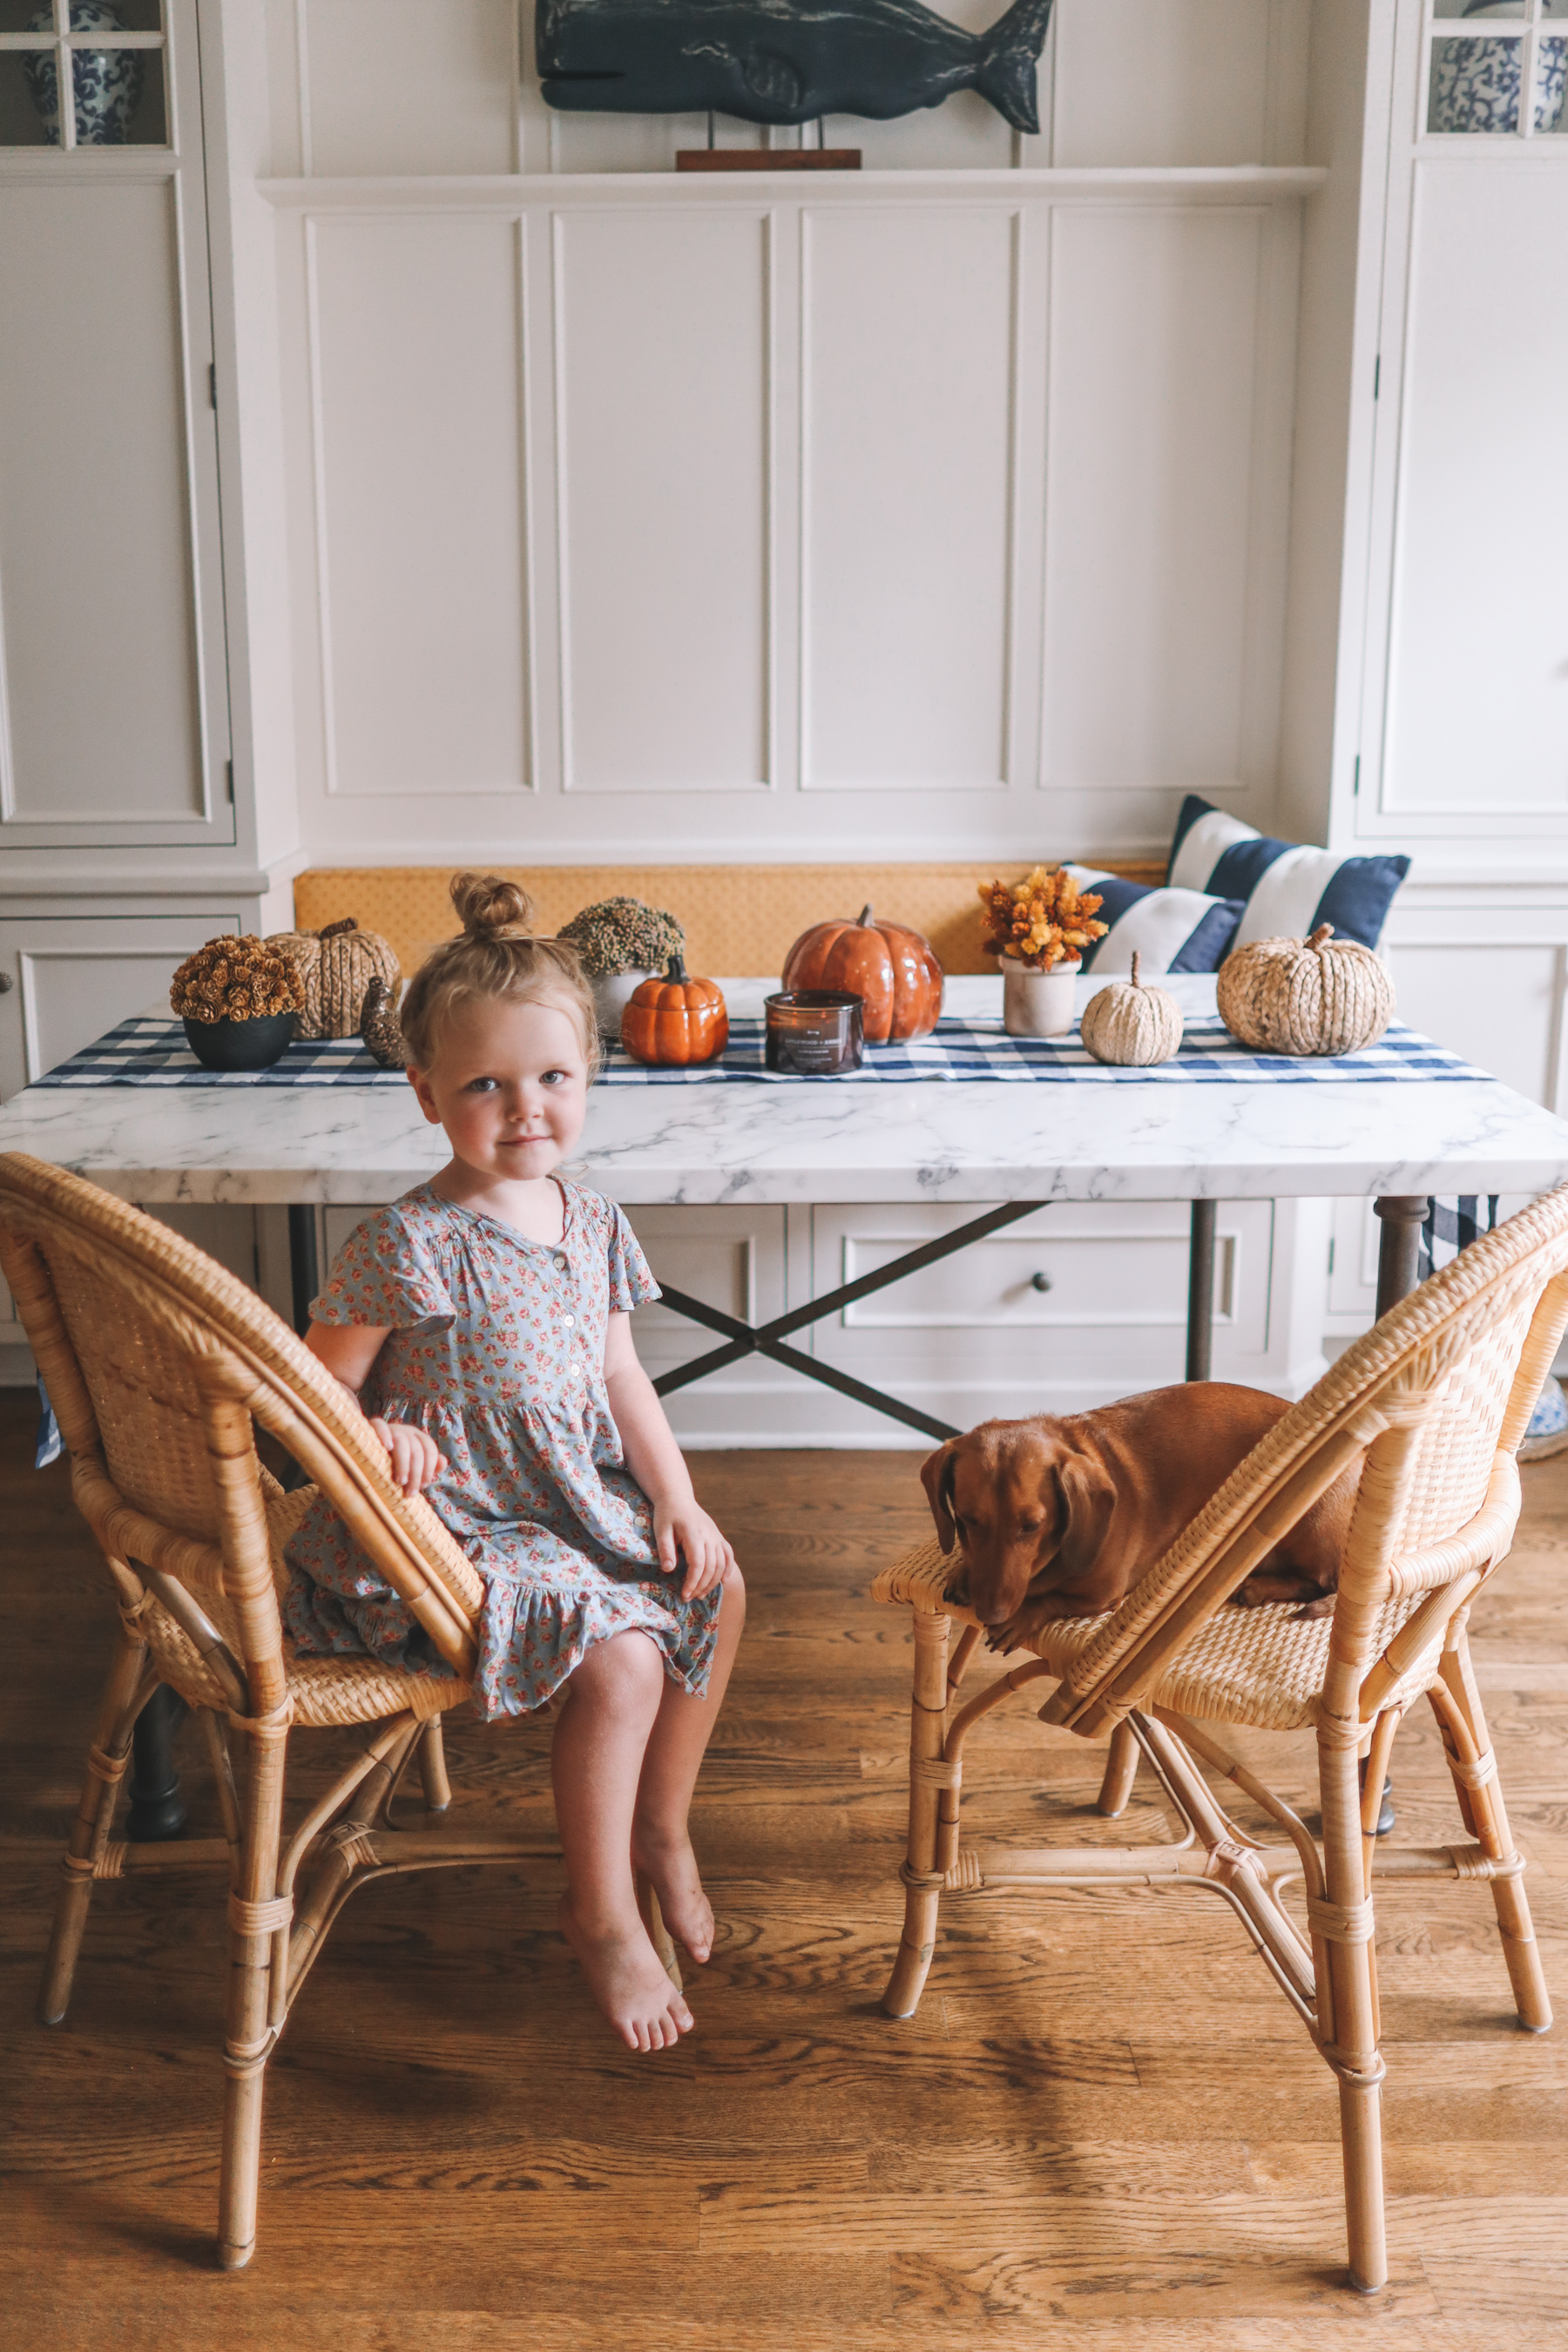 The Art of Rearranging Your Fall Decor